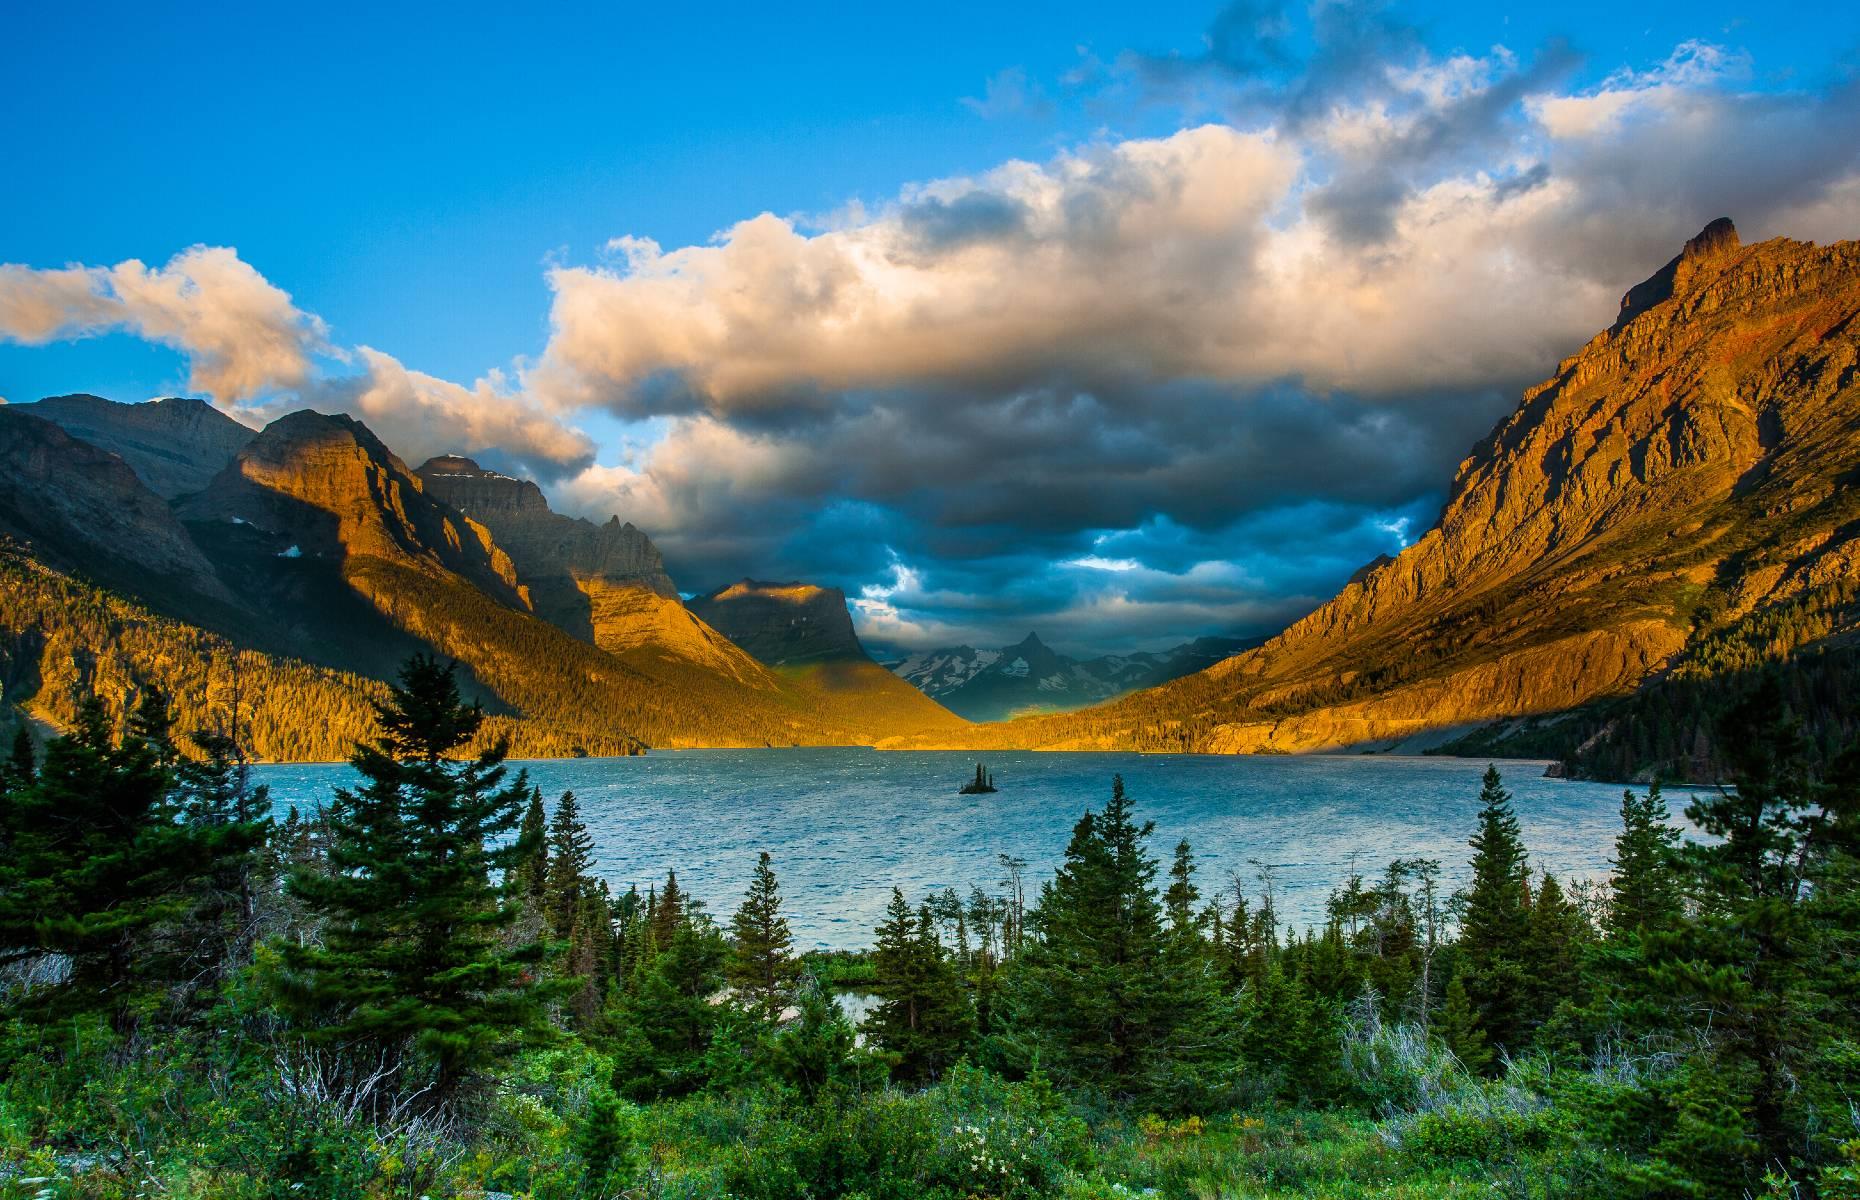 <p>A landscape of lofty peaks, ice-carved valleys, alpine lakes and rocky ridges blanketed in forests, the beauty of Glacier National Park is everywhere you look. The park’s wilderness area is made up of nearly one million acres of landscape with over 700 miles of trails slicing through it. </p>  <p><span><strong>Liked this? Click on the Follow button above for more great stories from loveEXPLORING</strong></span></p>